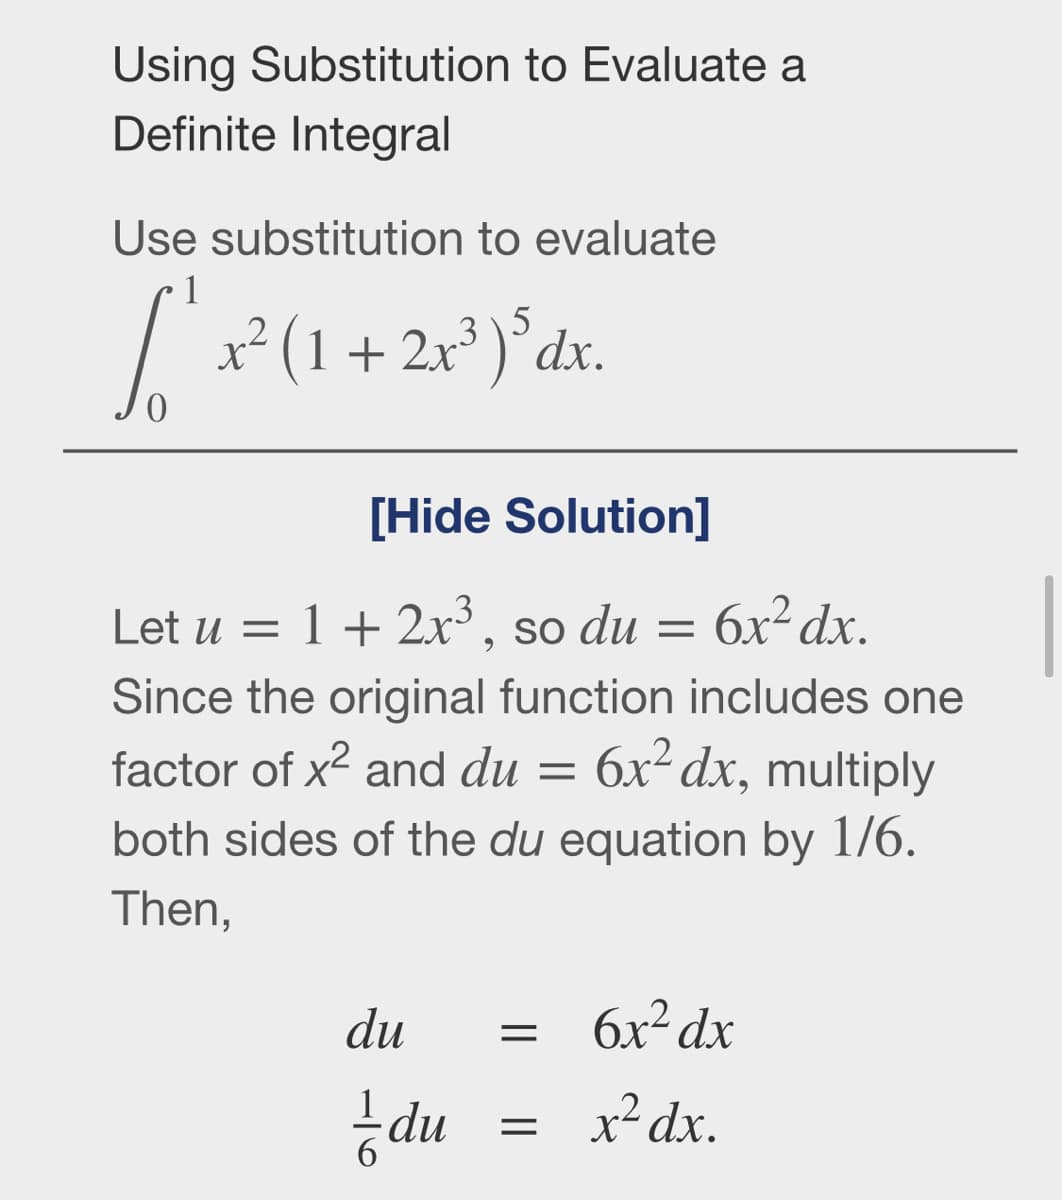 Using Substitution to Evaluate a
Definite Integral
Use substitution to evaluate
5
x² (1 + 2x³ )°dx.
[Hide Solution]
Let u = 1+ 2x³, so du =
6x² dx.
Since the original function includes one
factor of x2 and du
6x² dx, multiply
both sides of the du equation by 1/6.
Then,
du
бх? dx
du
x² dx.
